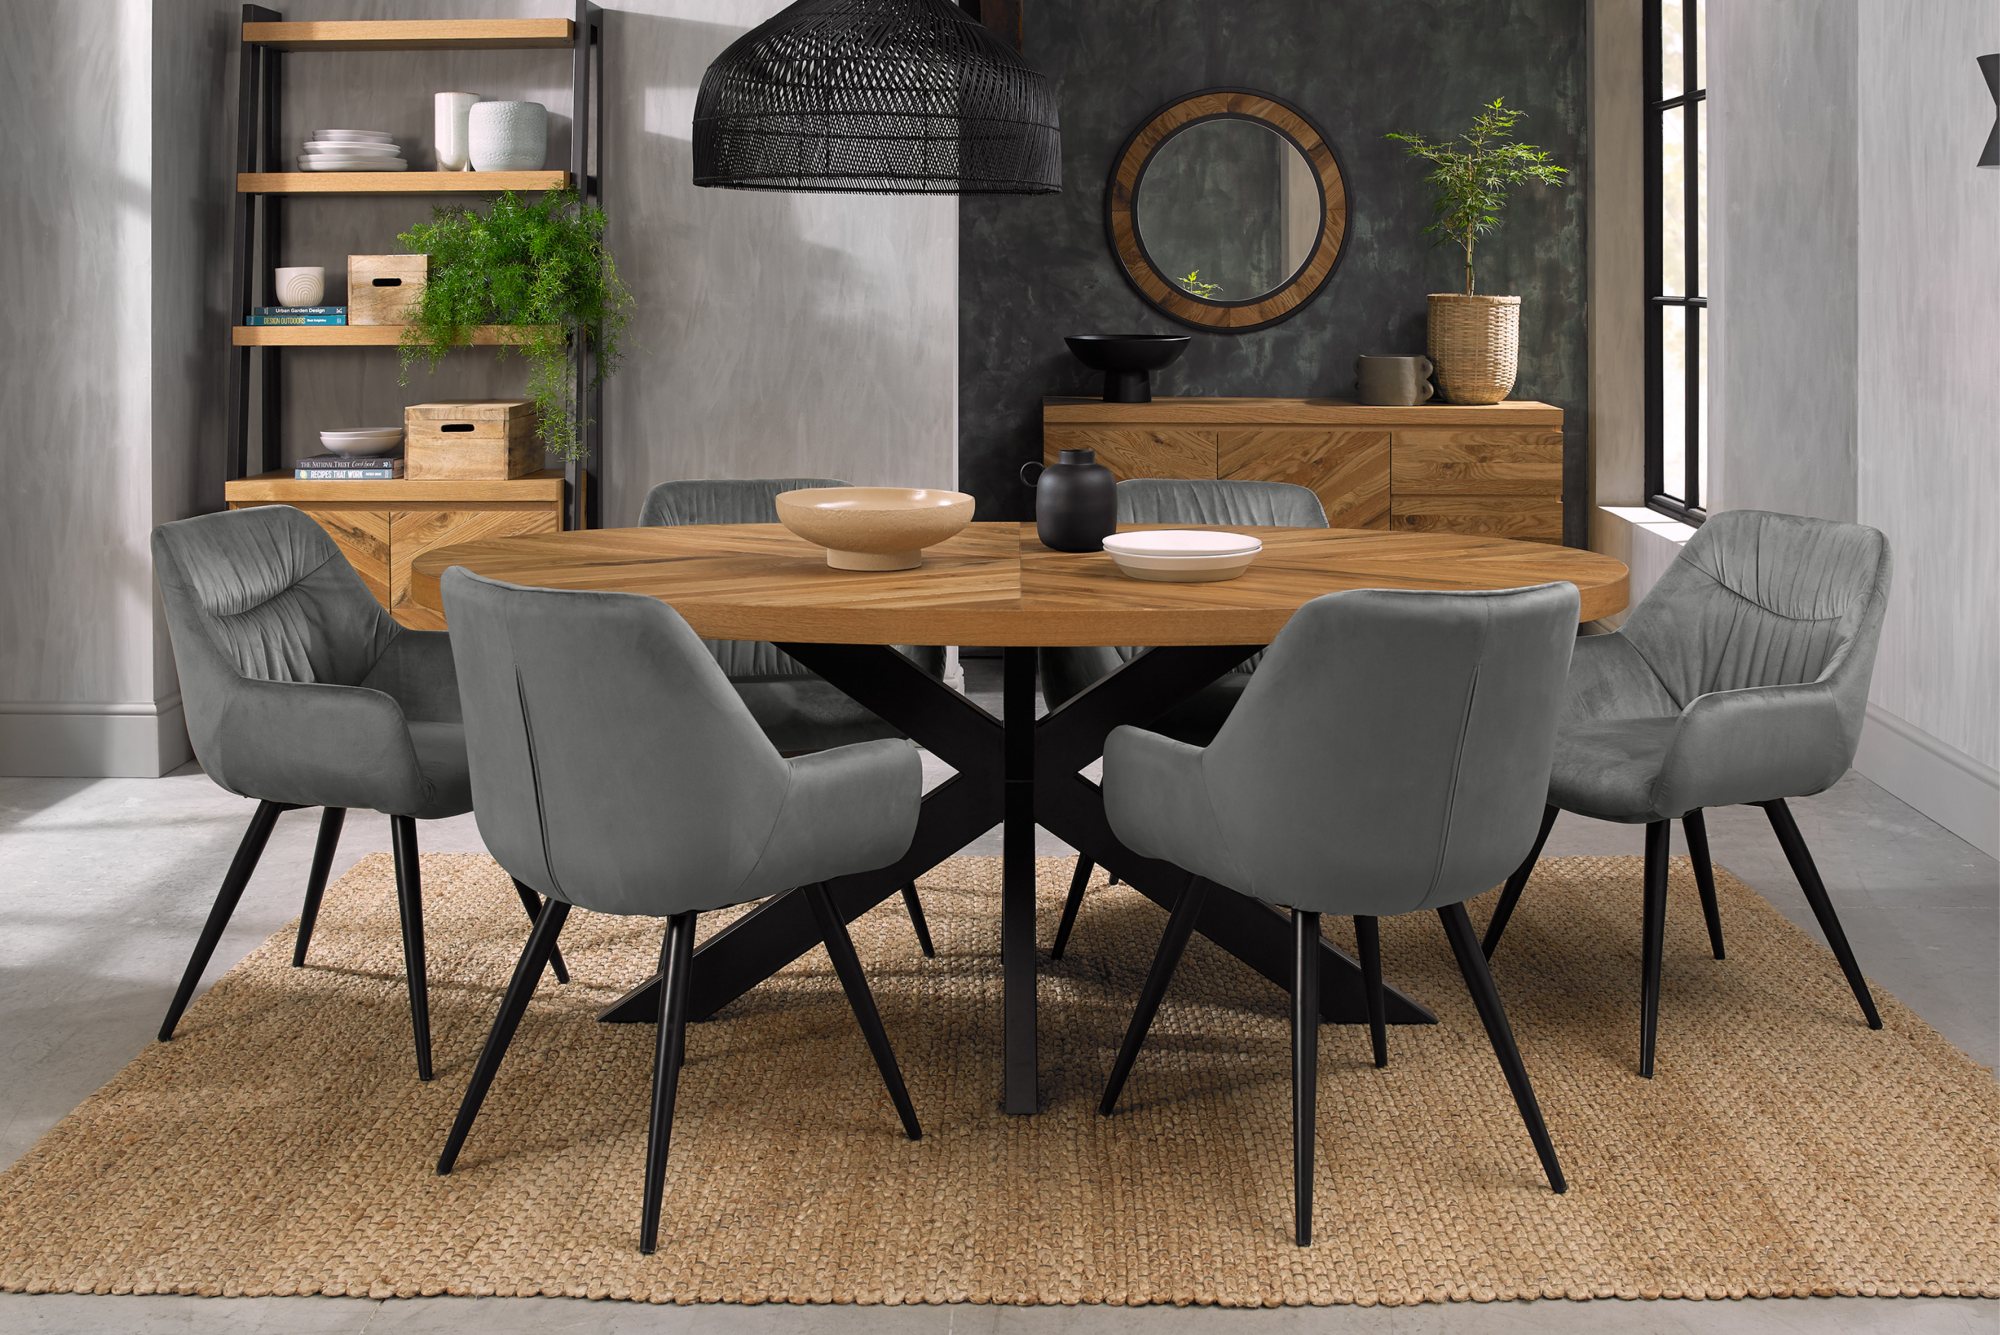 Home Origins Bosco Rustic Oak 6 seater dining table with 6 Dali chairs- grey velvet fabric